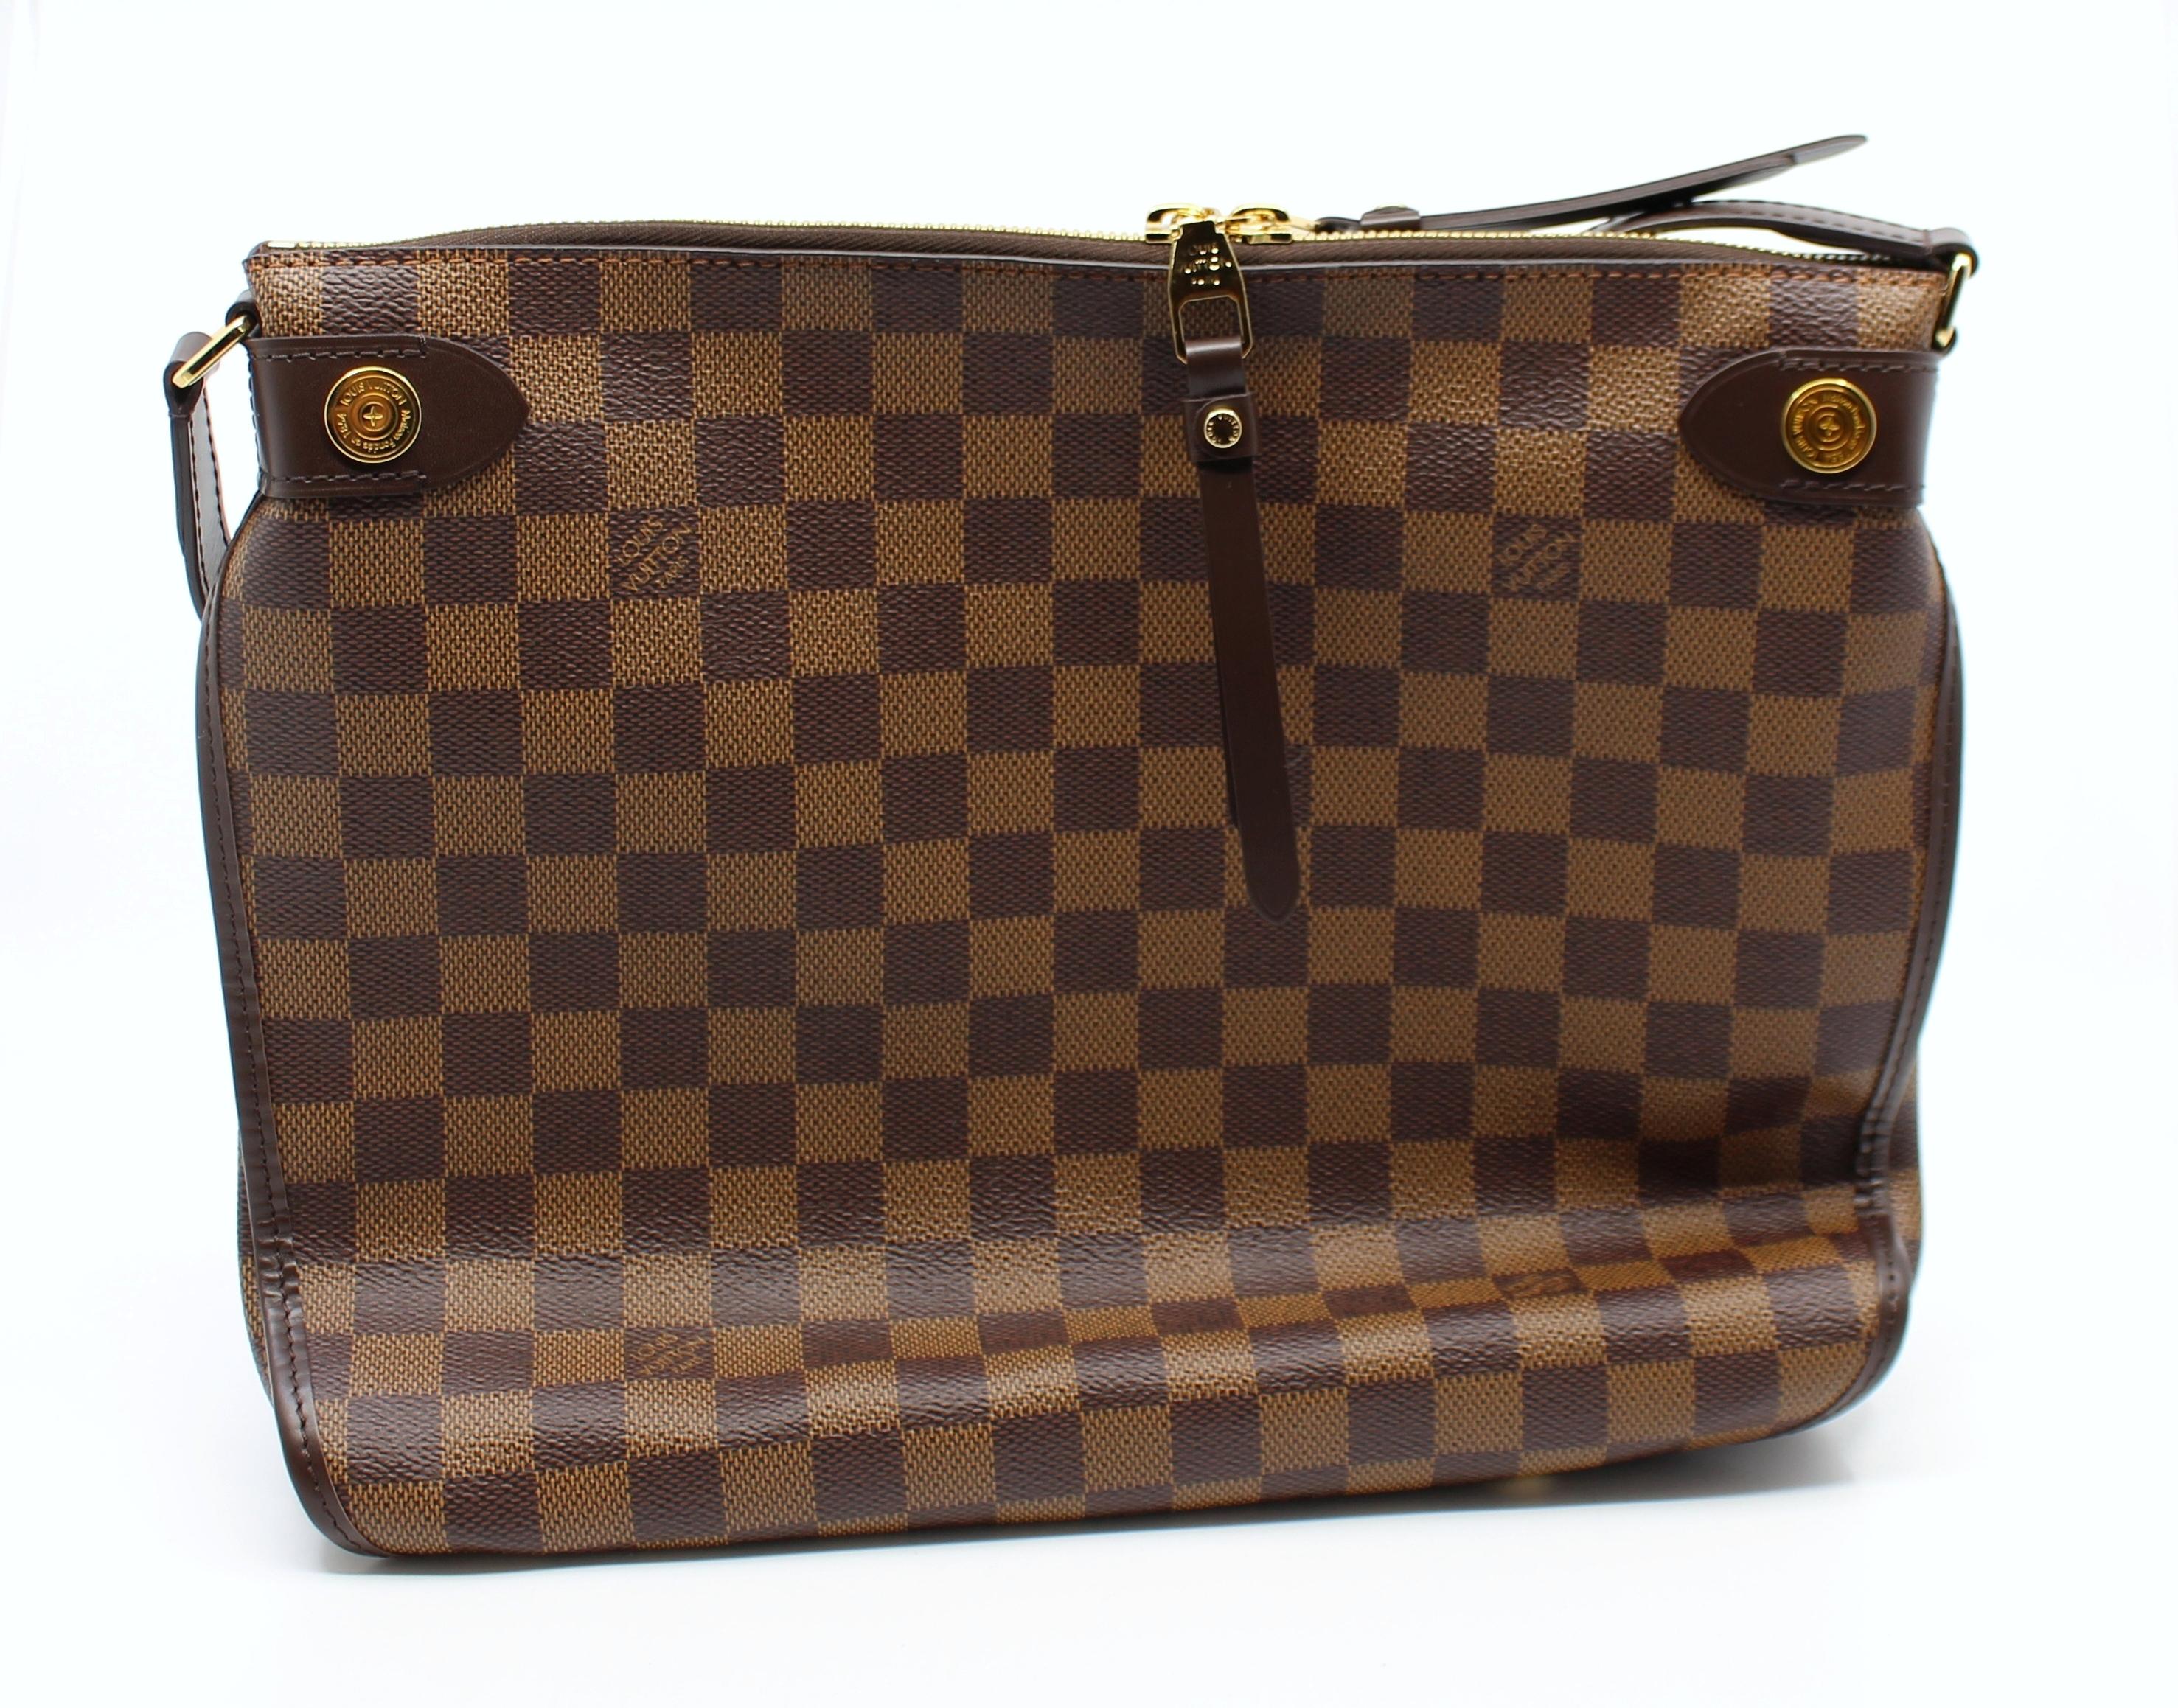 Louis Vuitton Damier Duomo Handbag In Excellent Condition For Sale In Worcester, Worcestershire